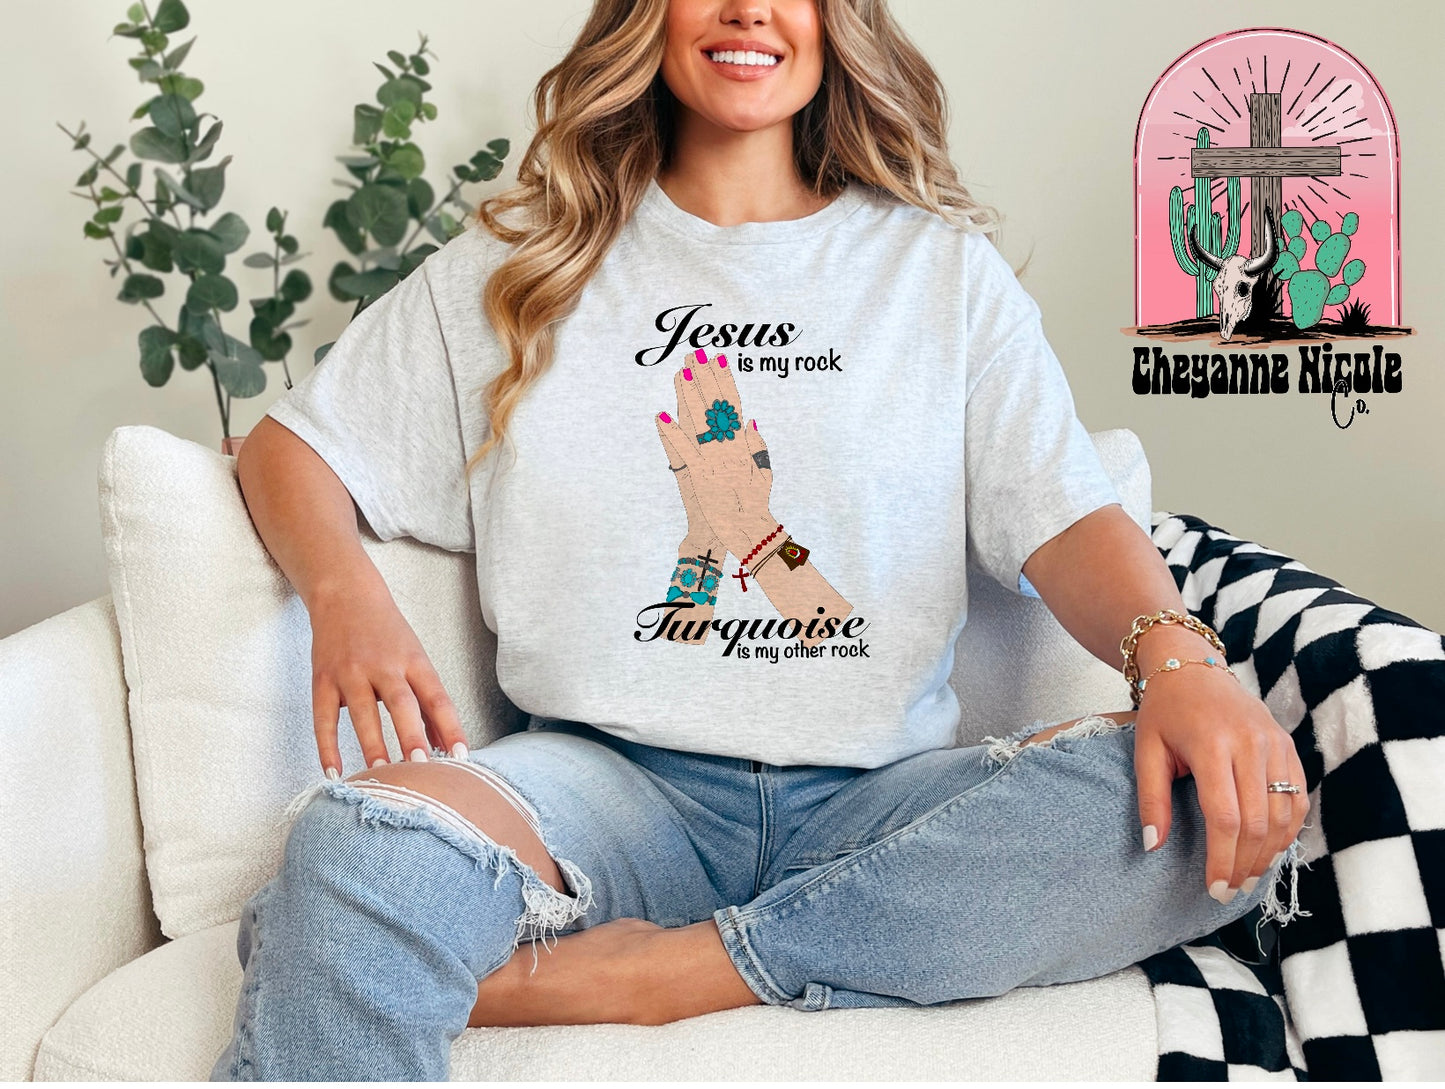 Jesus is my Rock, turquoise is my other rock Crewneck or Shirt